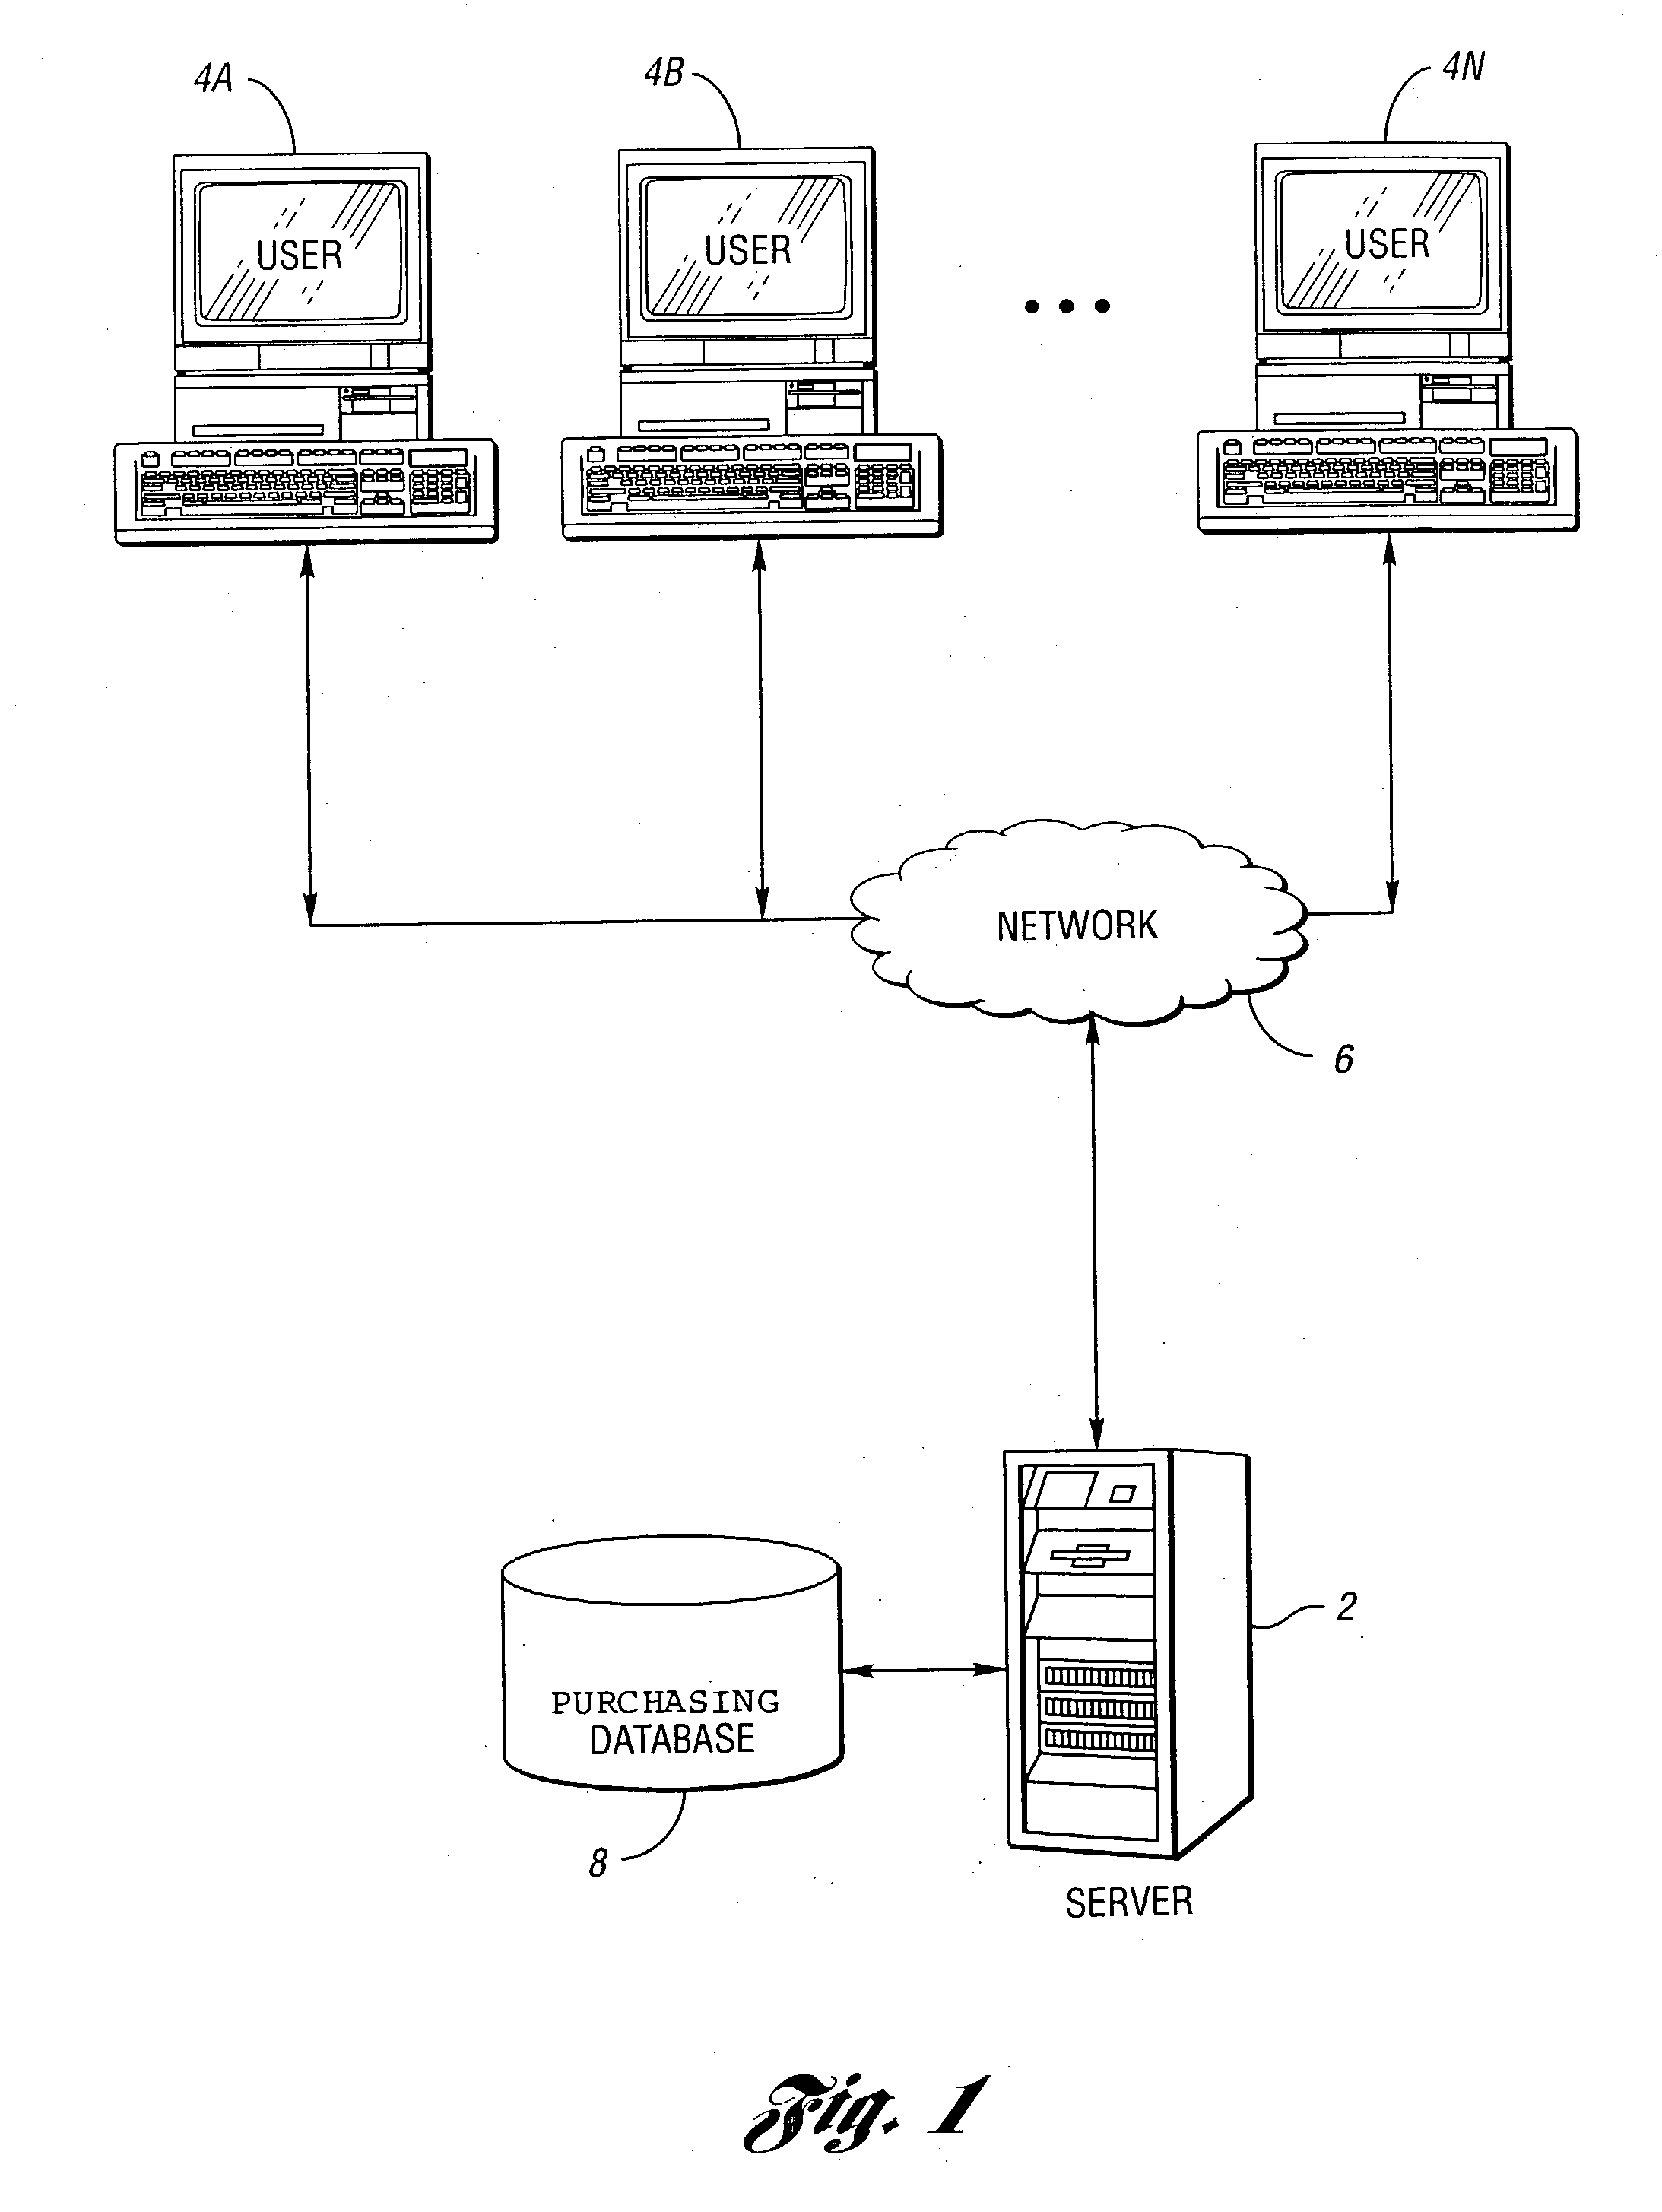 Computer-implemented method and system for retroactive pricing for use in order procurement